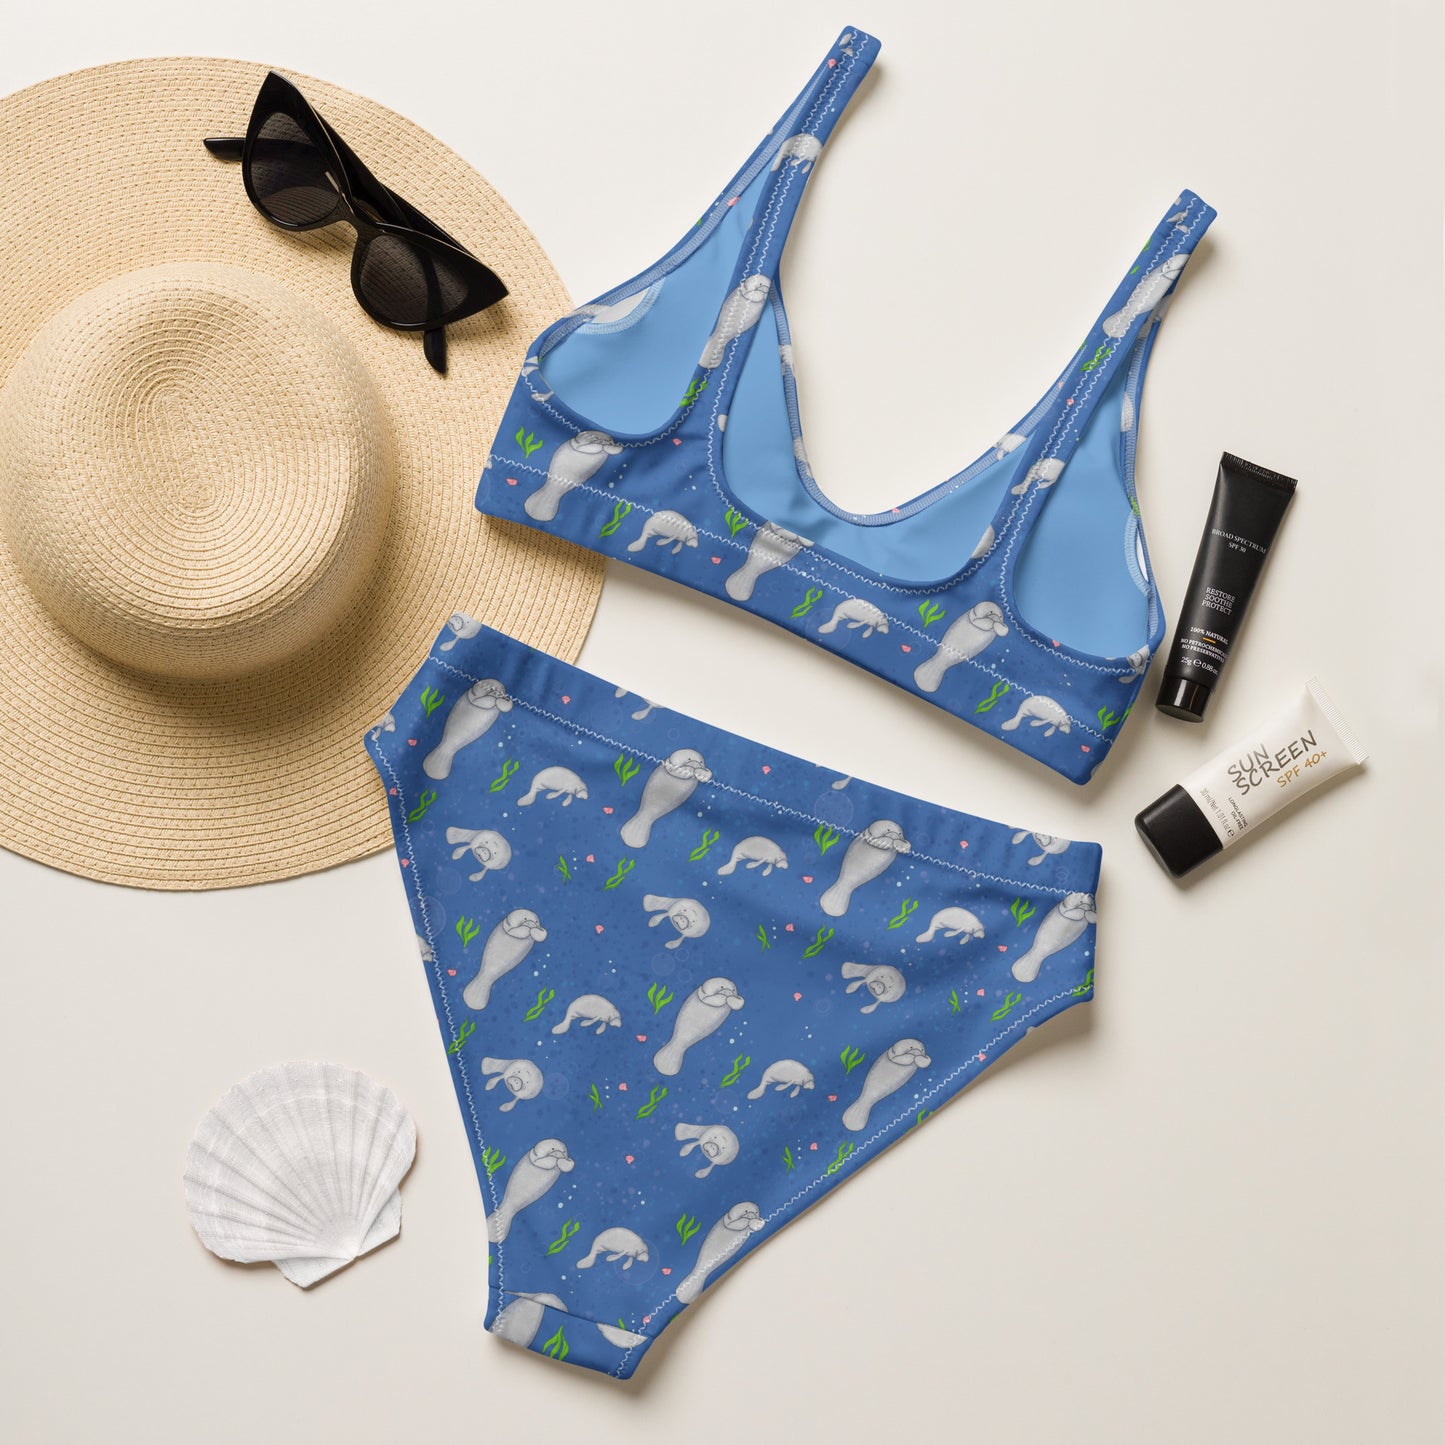 High-waisted bikini with hand-illustrated manatee pattern on a blue background. Made from recycled polyester combined with stretchable fabric. Has double layers and removable pads. Flay lay view of back, next to sunhat, sunglasses, sunscreen, and seashell.